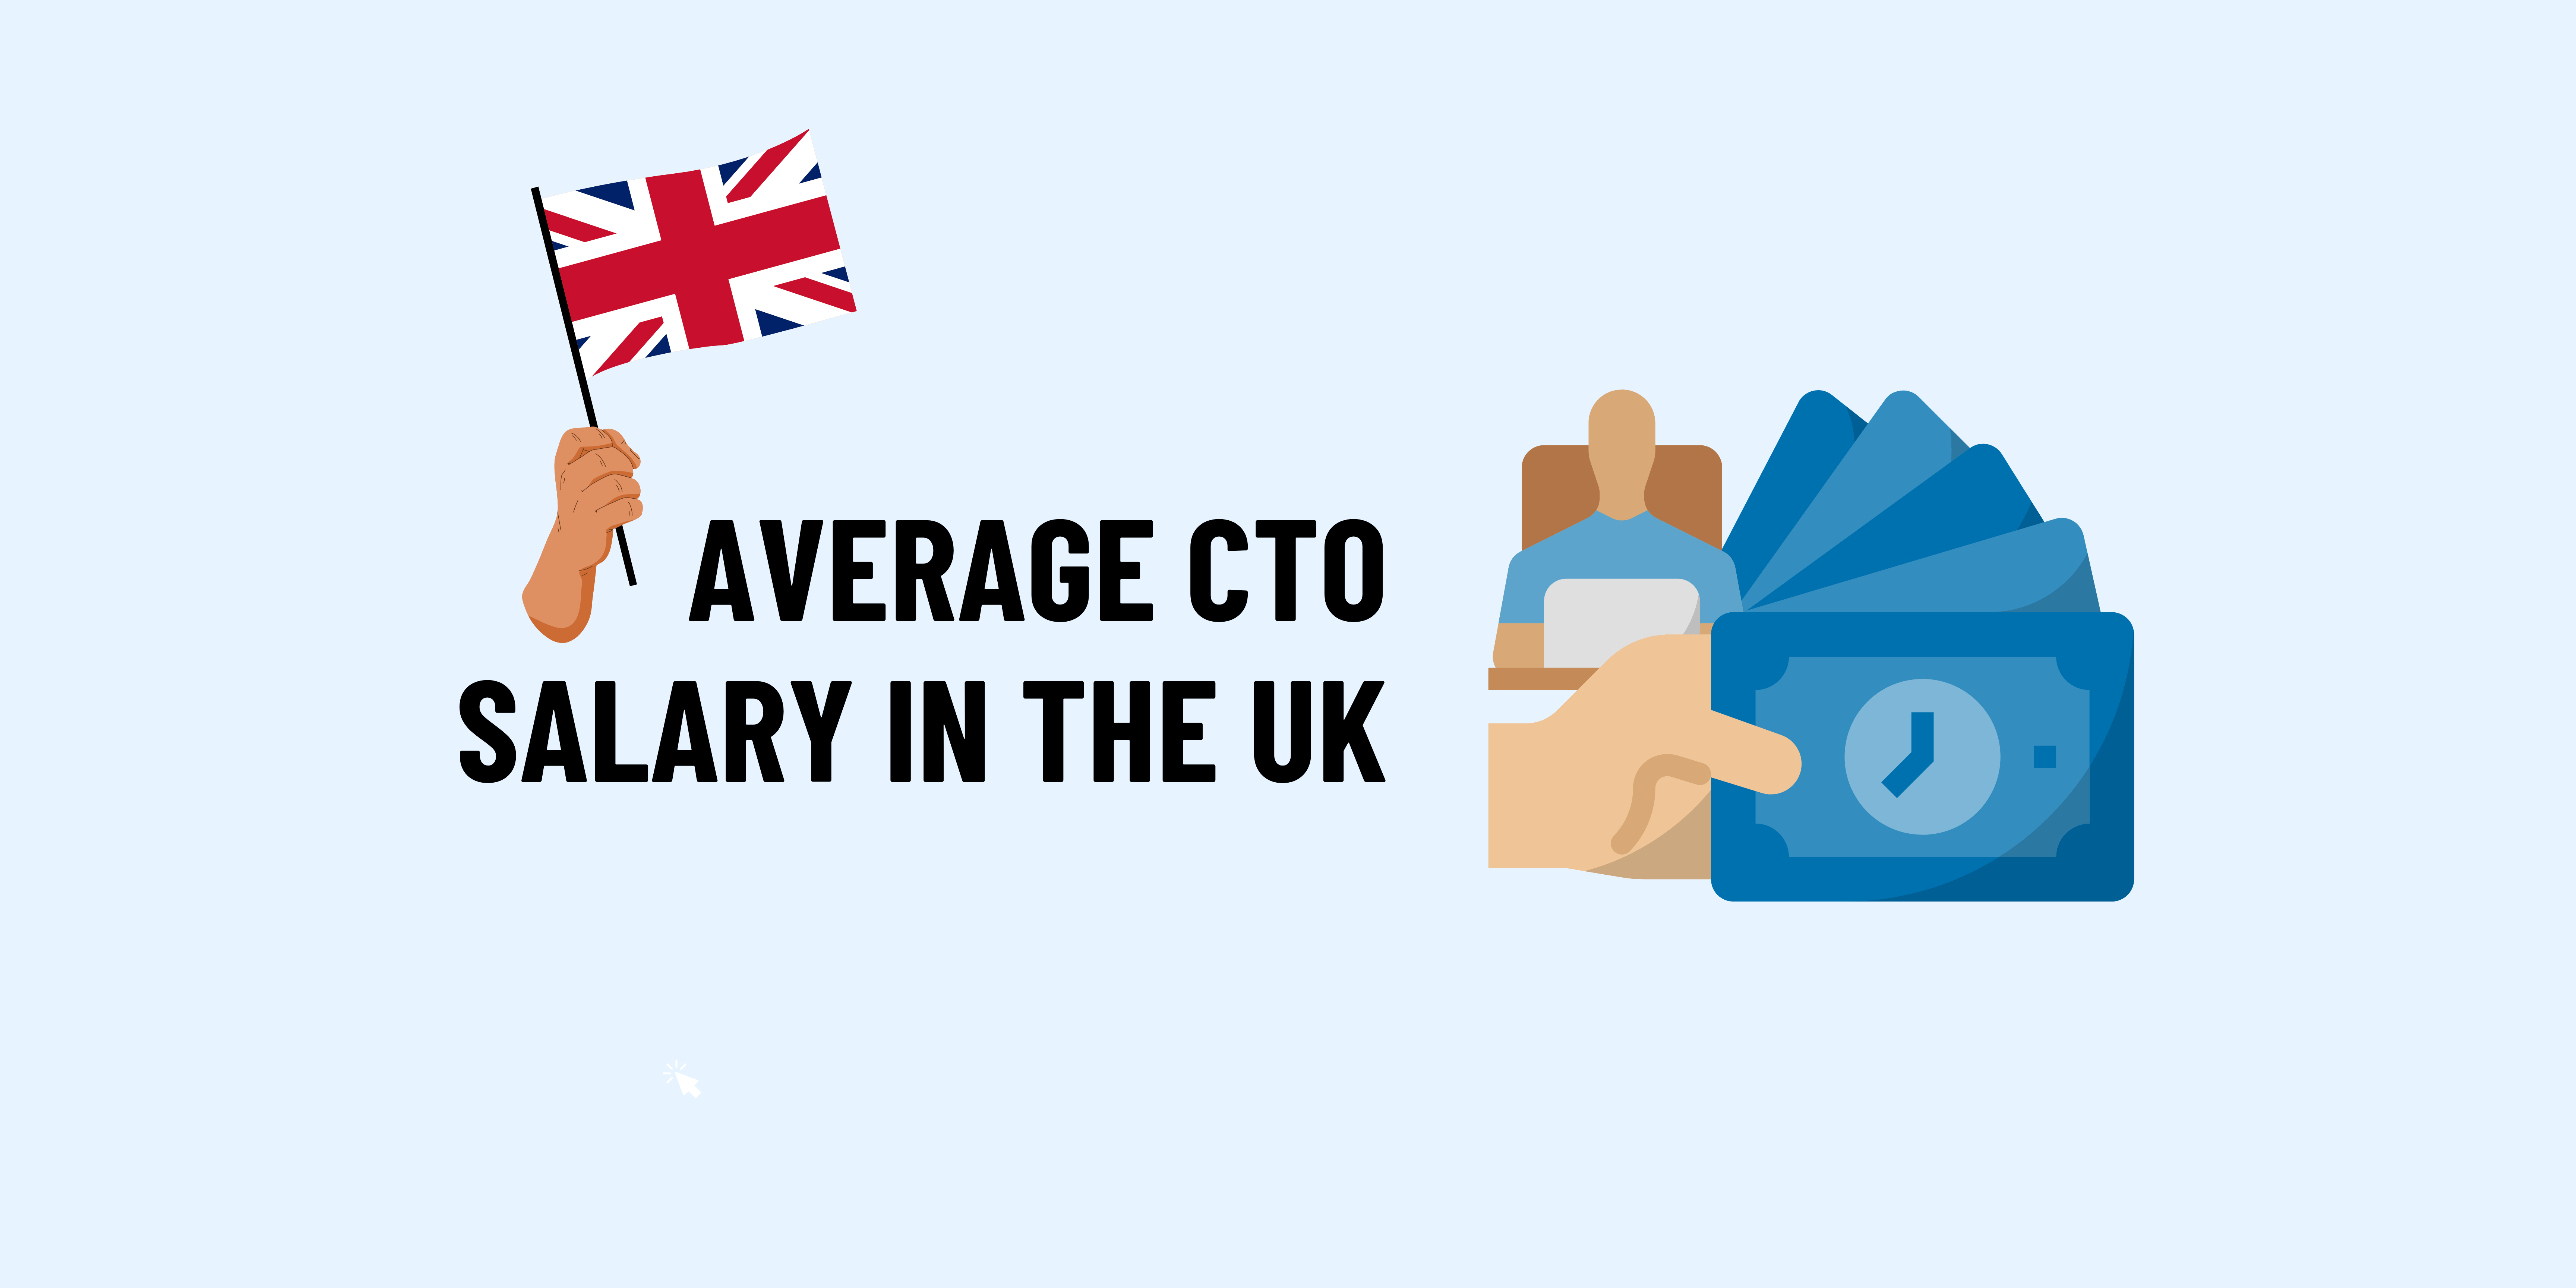 What is the Average CTO Salary in the UK?